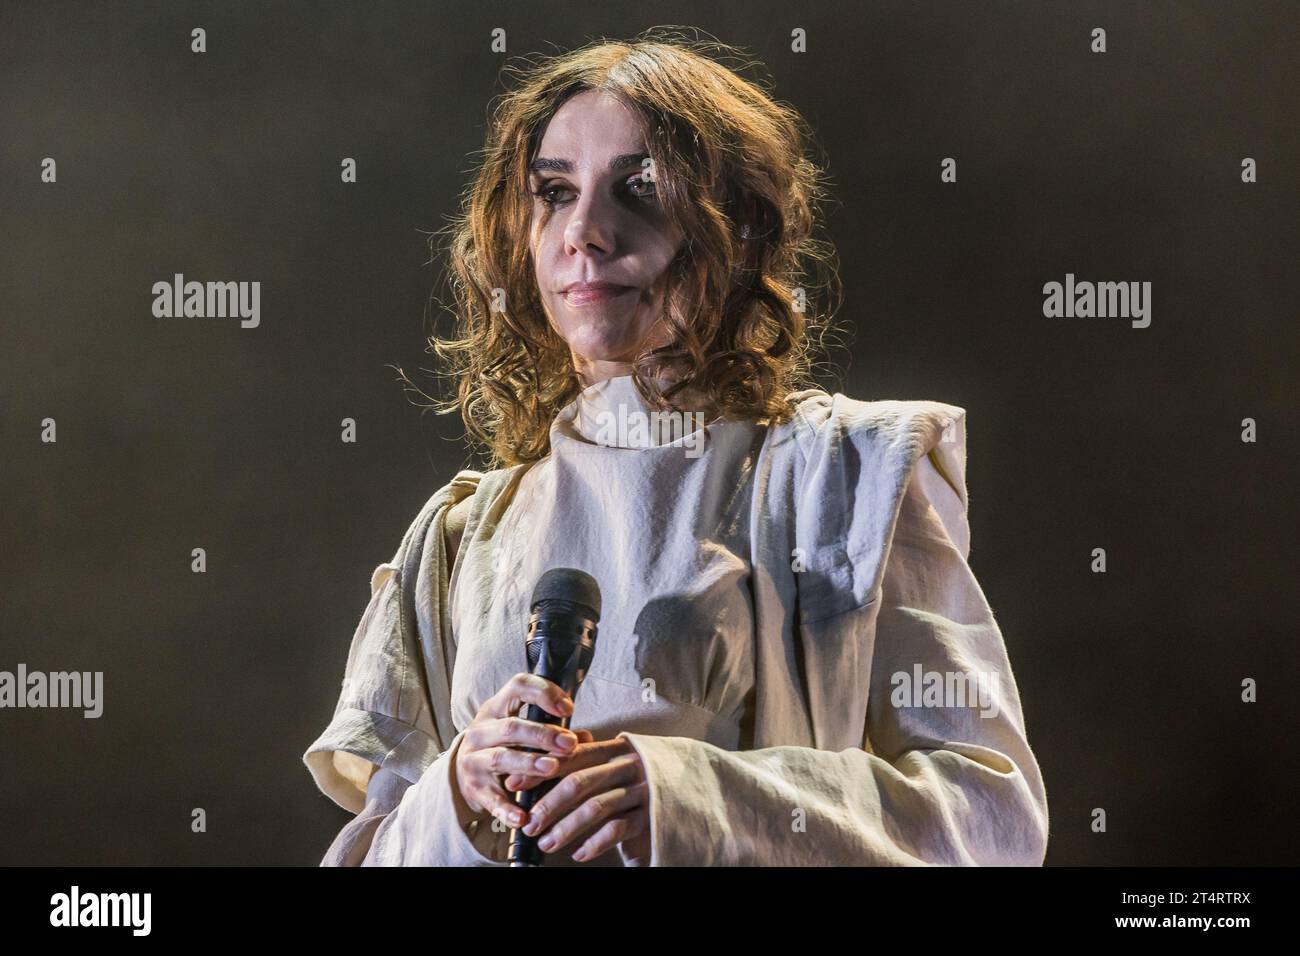 PJ Harvey performing live on stage on 30 October 2023 on tour Polly Jean Stock Photo